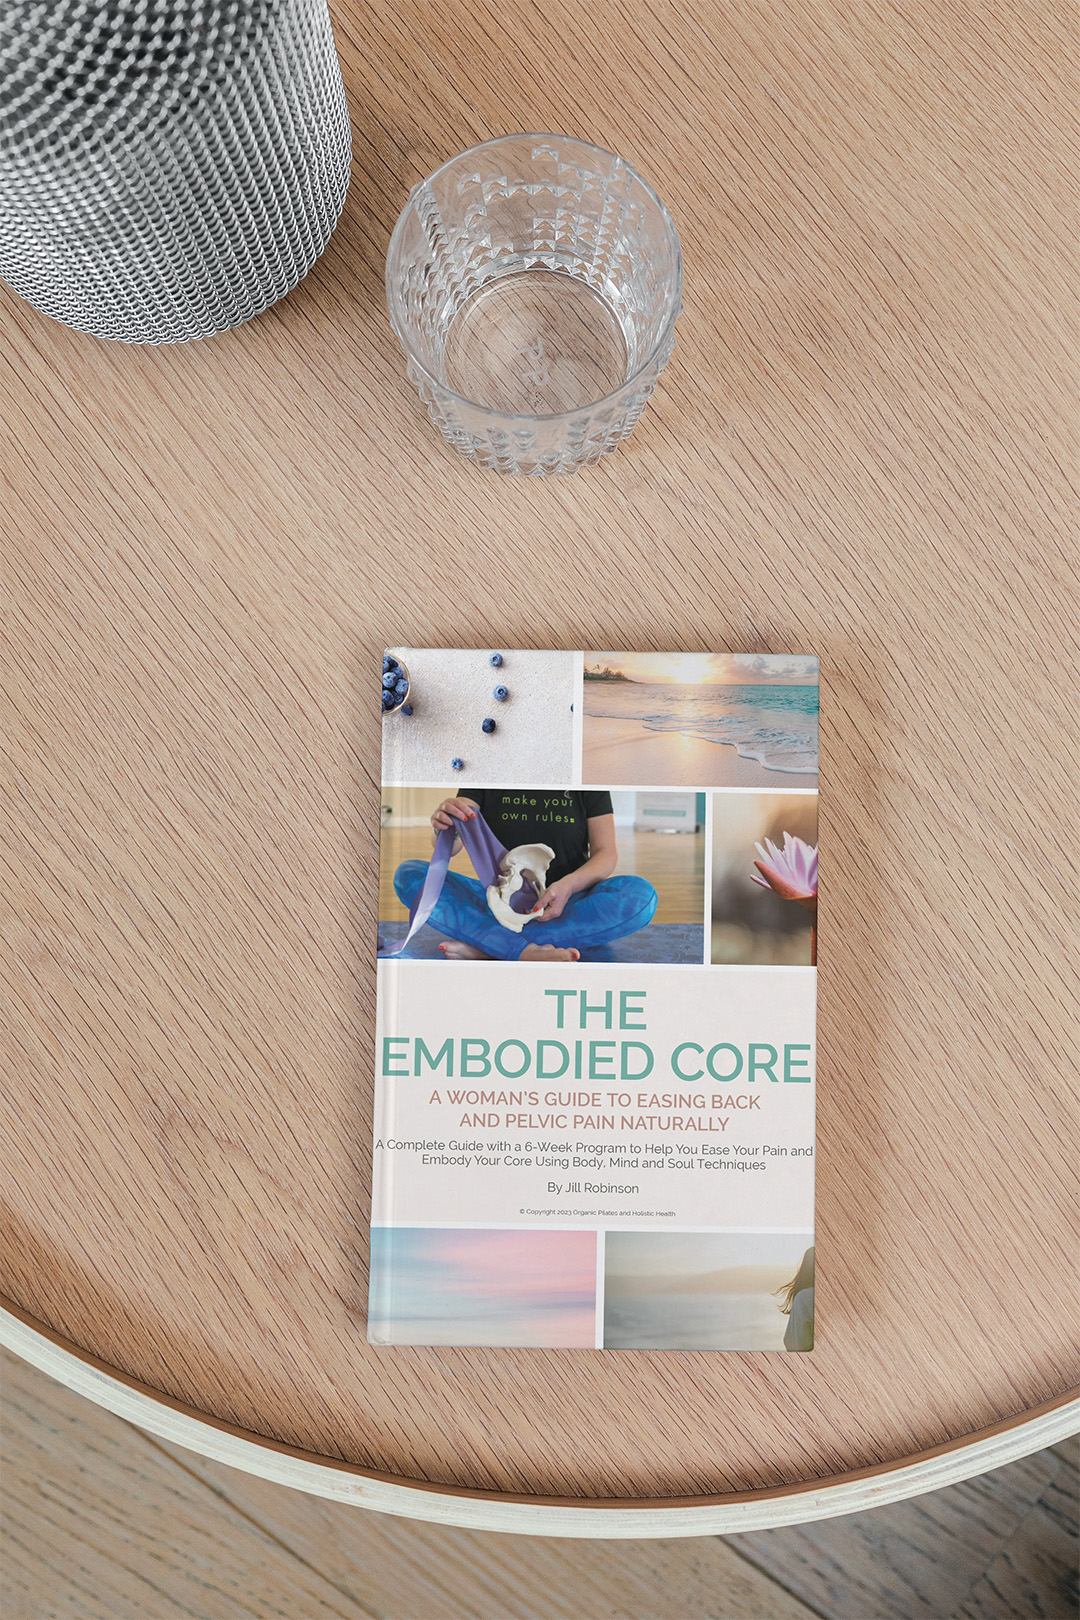 Buy 'The Embodied Core' and begin your healing journey